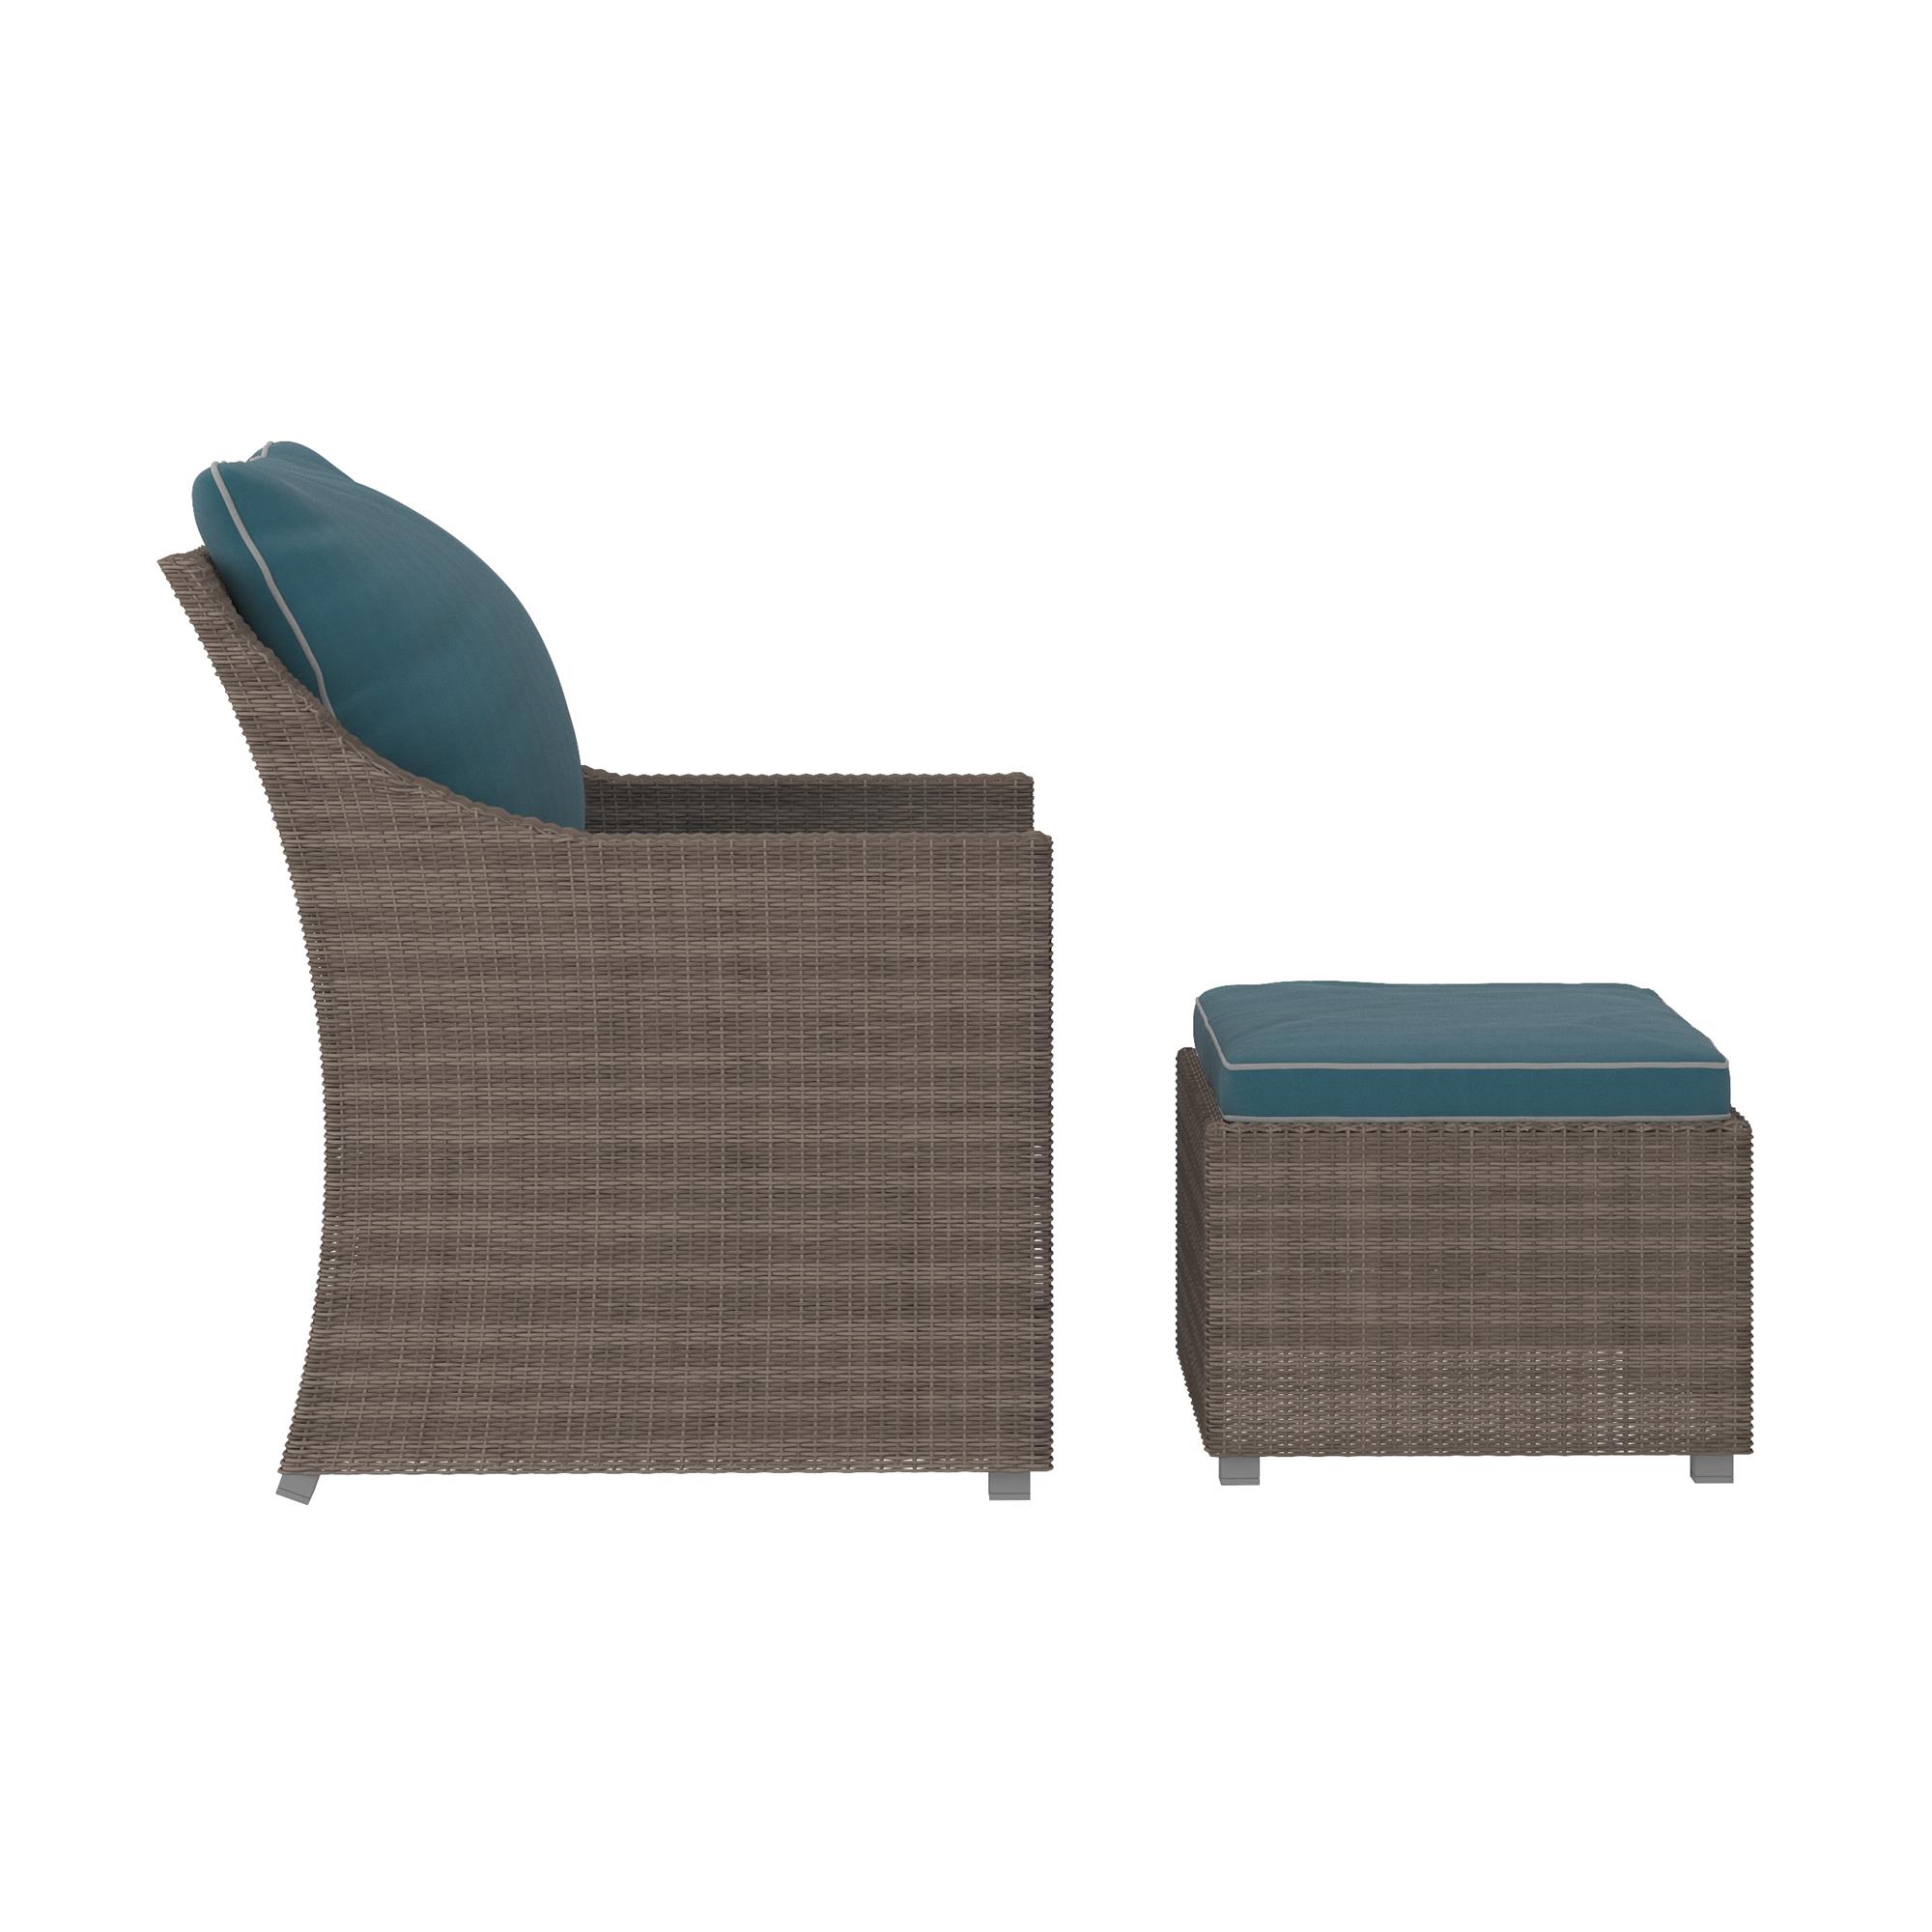 COSCO Outdoor, 2 Piece Patio Set, Lounge Chair, Multifunctional Ottoman/Table, Gray Wicker, Teal Blue Cushions - image 2 of 9